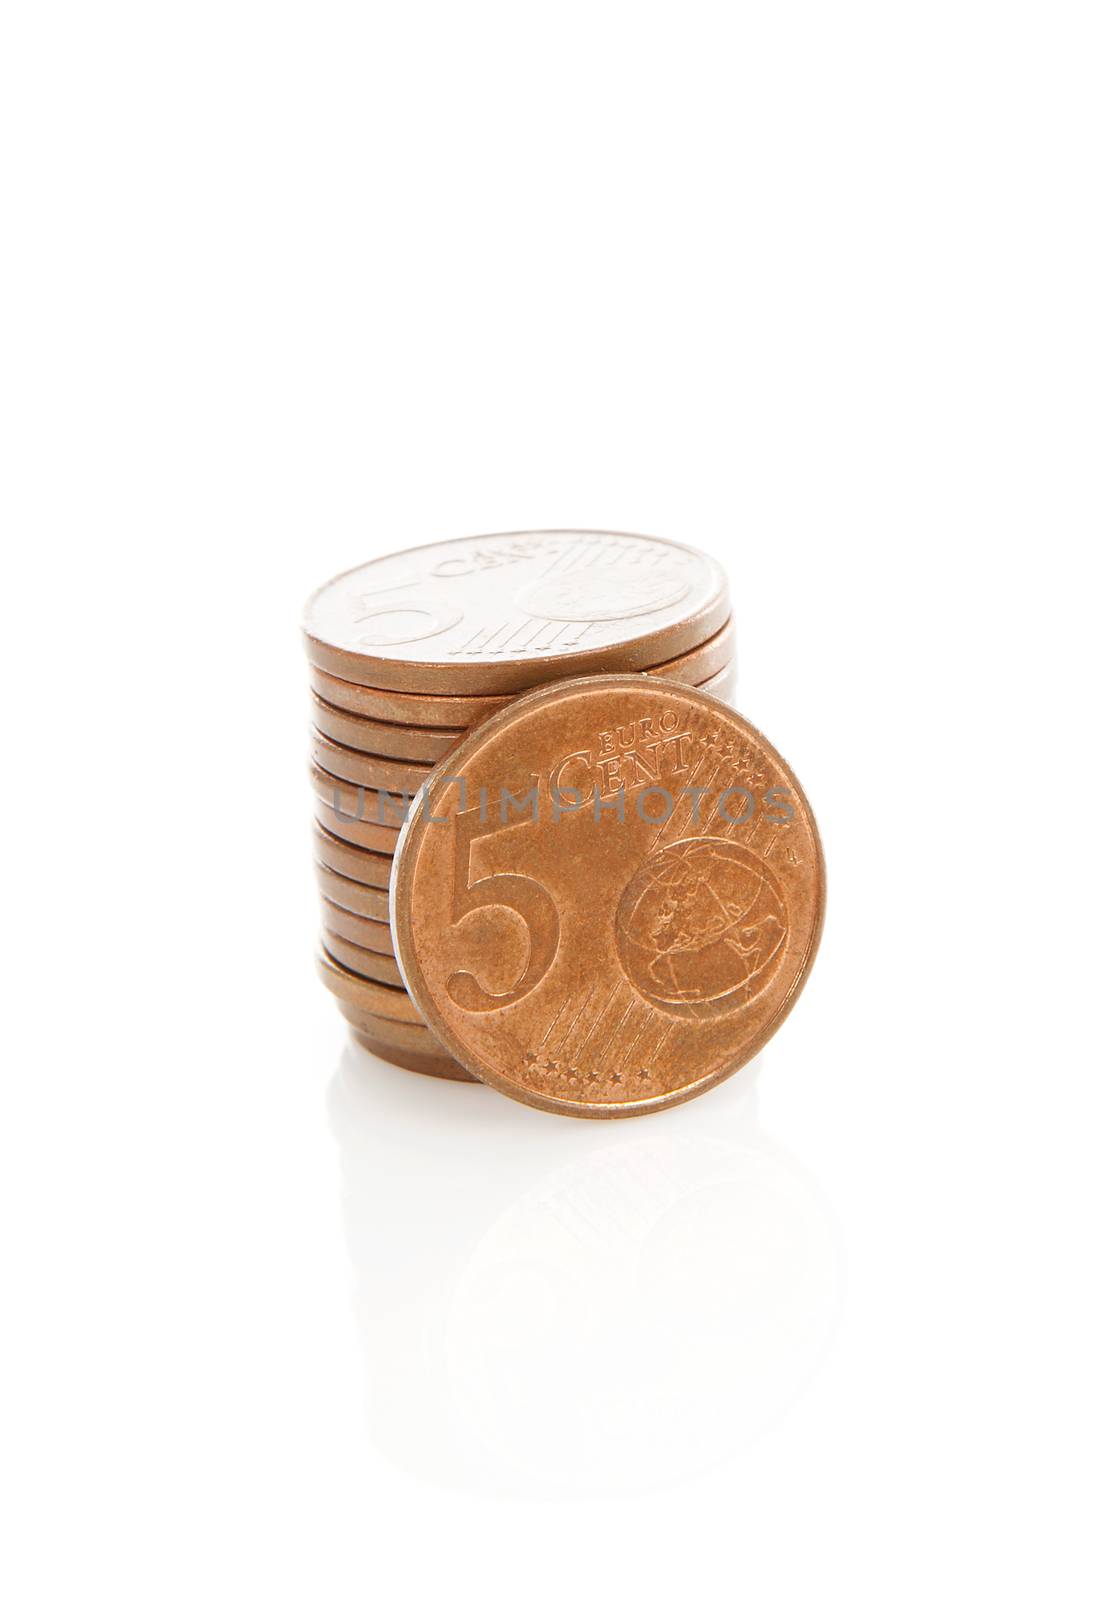 Piles of 5 cents  Euro money coins over white background